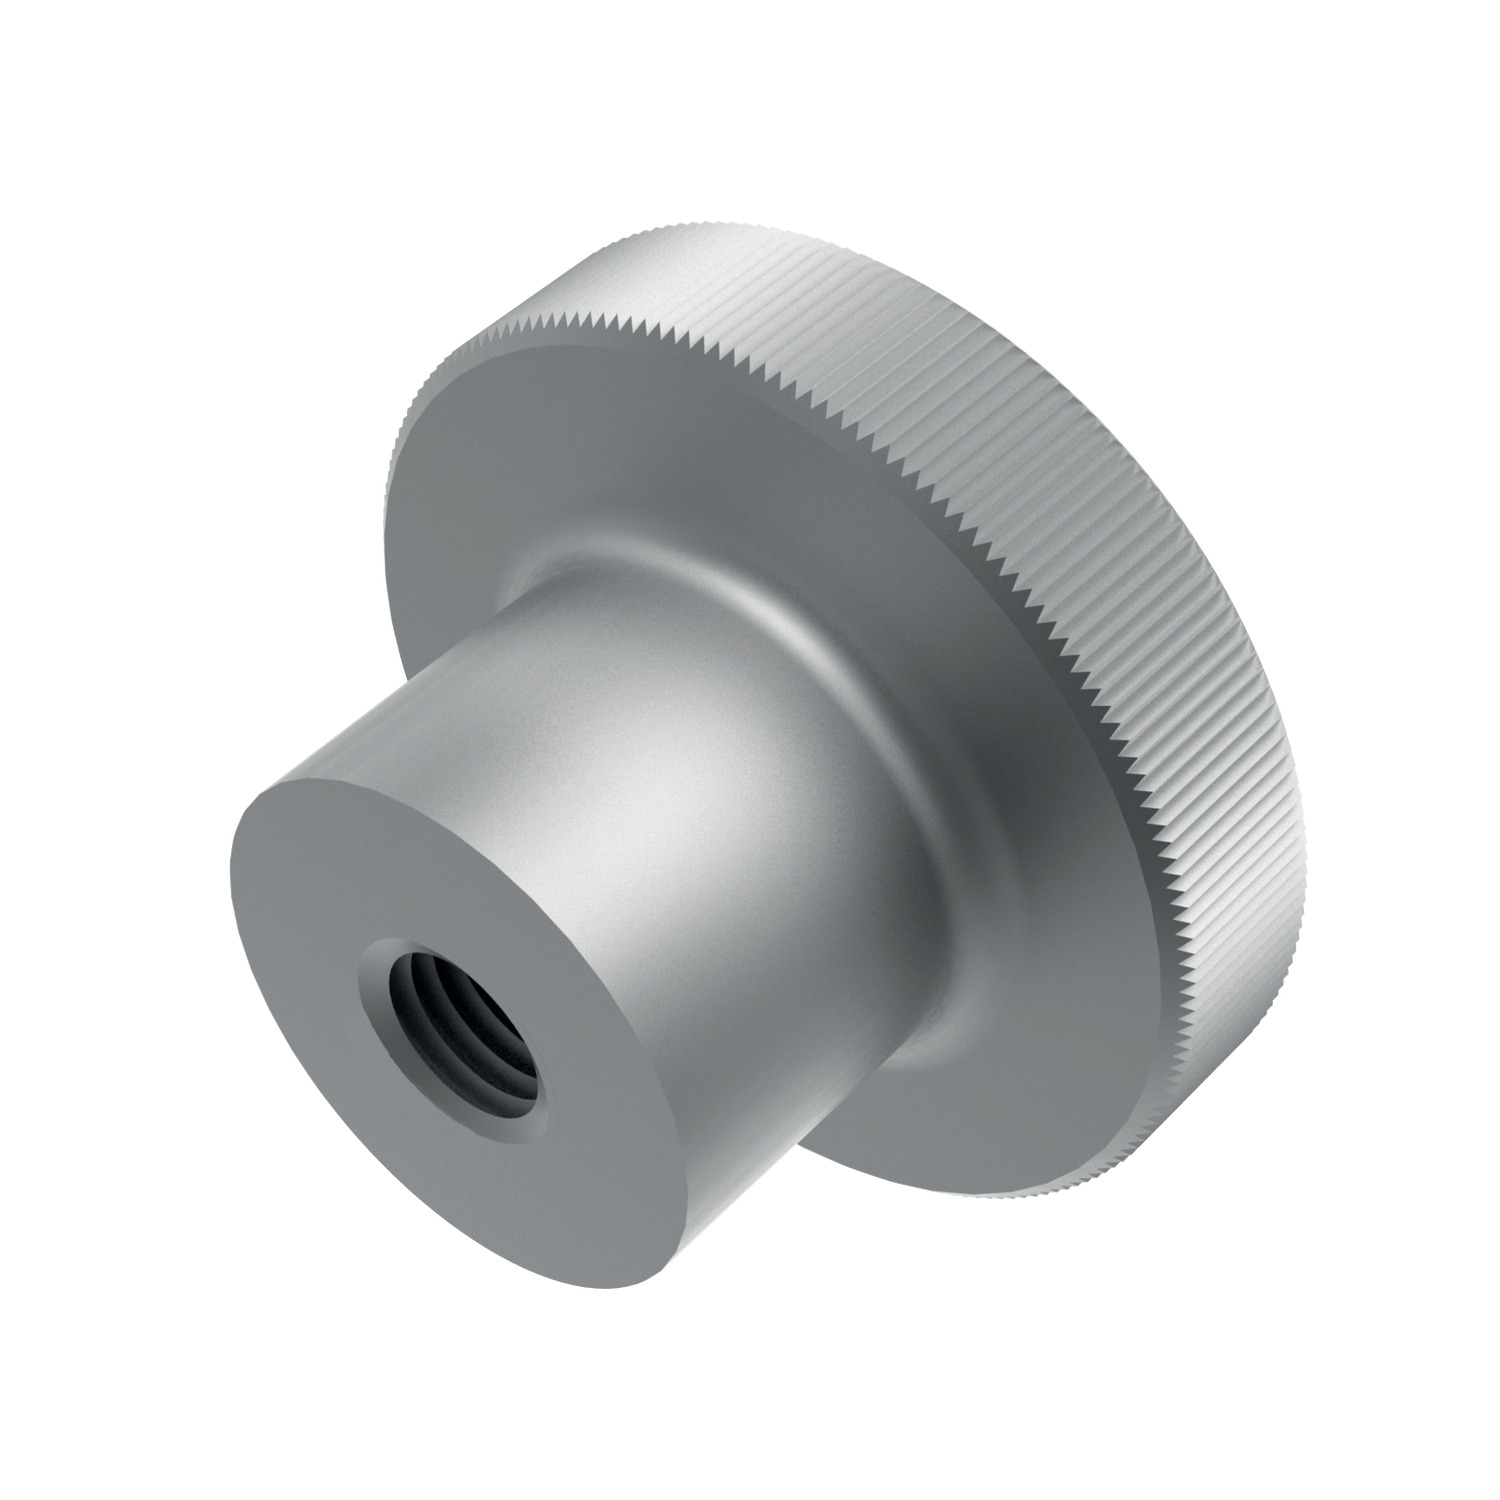 Product P0403.A4, Knurled Thumb Nuts With collar - A4 stainless / 